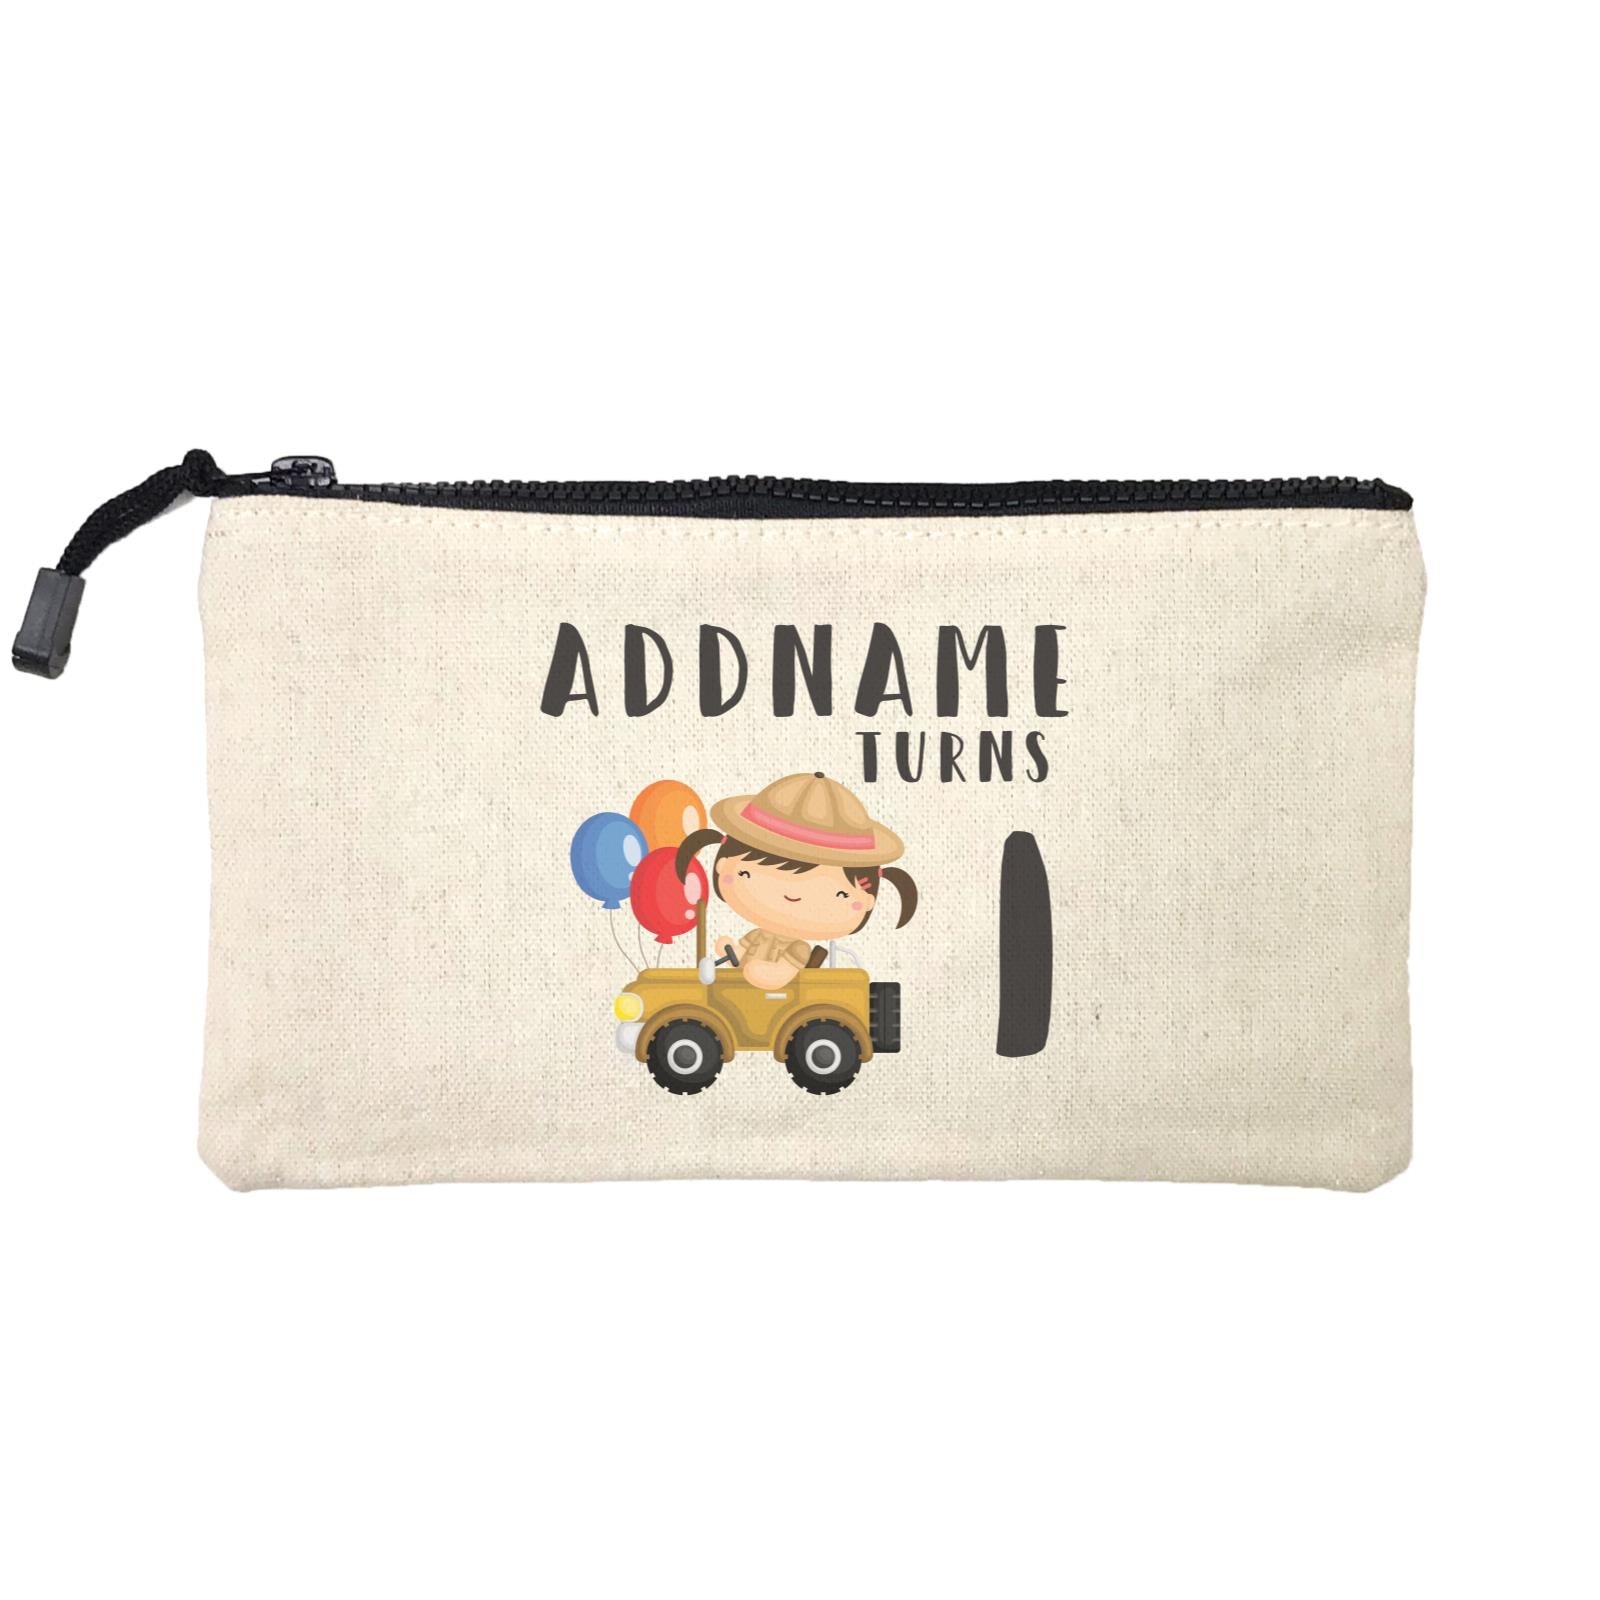 Birthday Safari Explorer Girl Driving Jeep Car Addname Turns 1 Mini Accessories Stationery Pouch